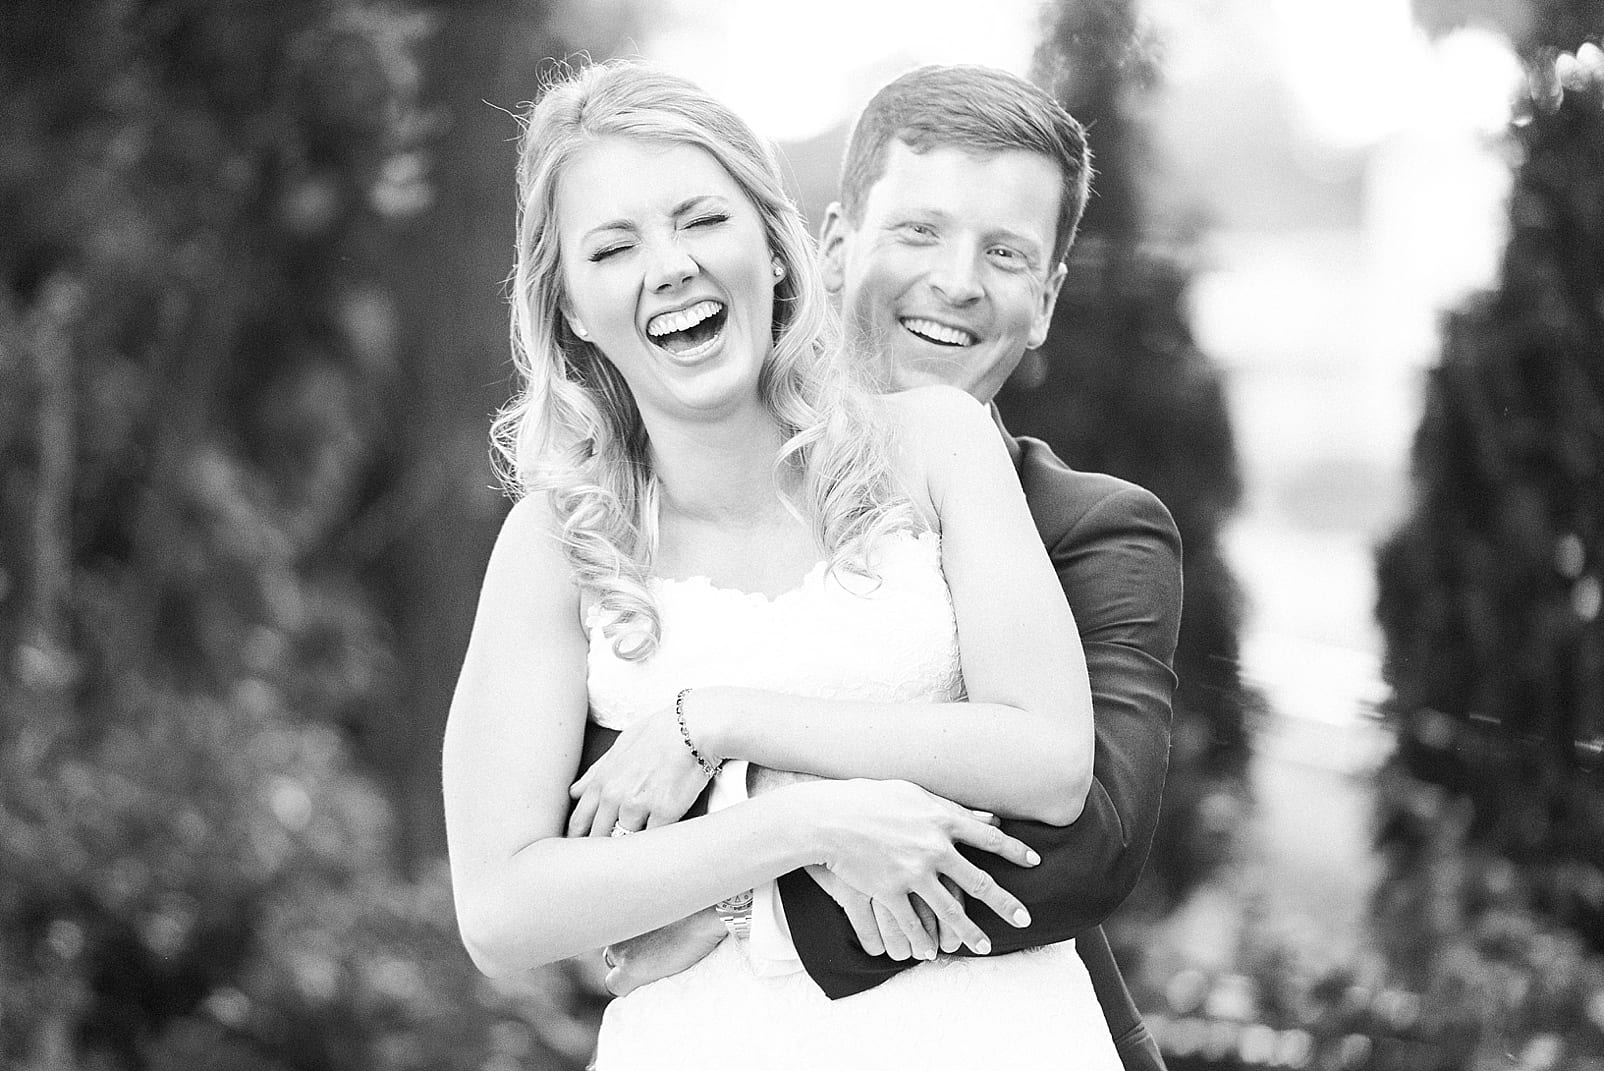 melrose knitting mill wedding photographer raleigh industrial wedding bride and groom laughing photo